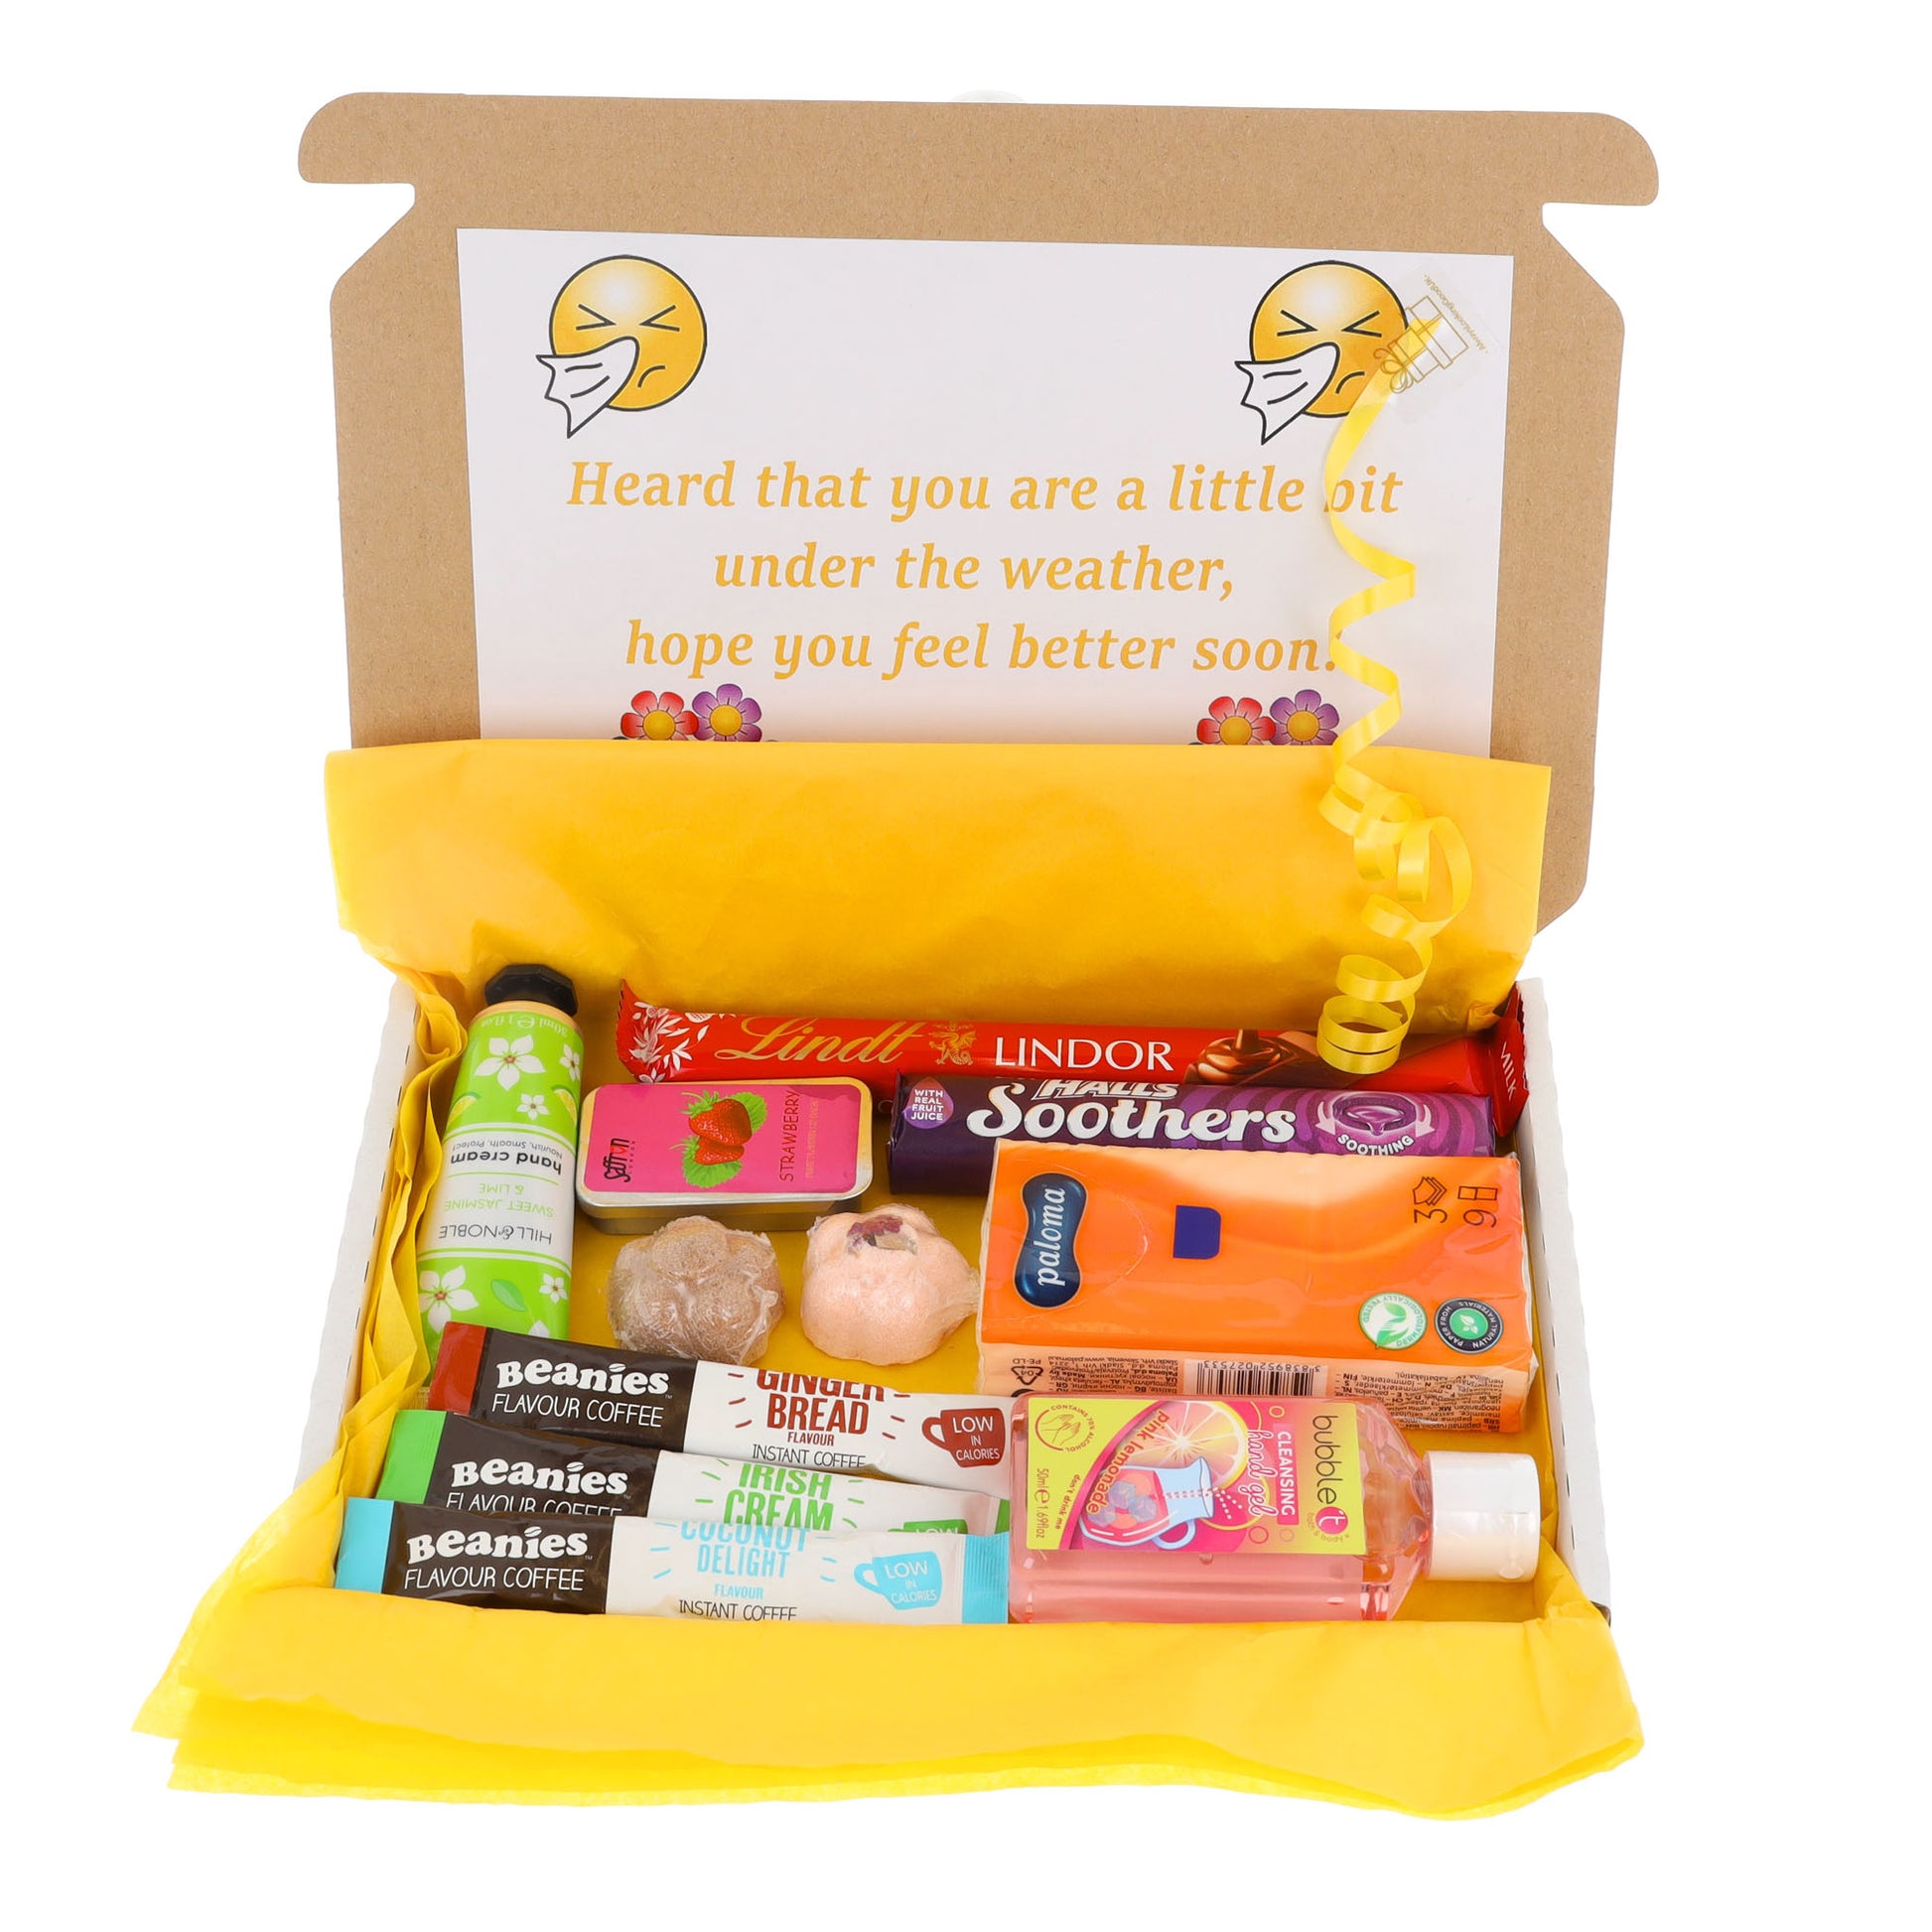 Get Well Soon Care Package Hug in a Box Letterbox Gift Set  - Always Looking Good - Coffee  